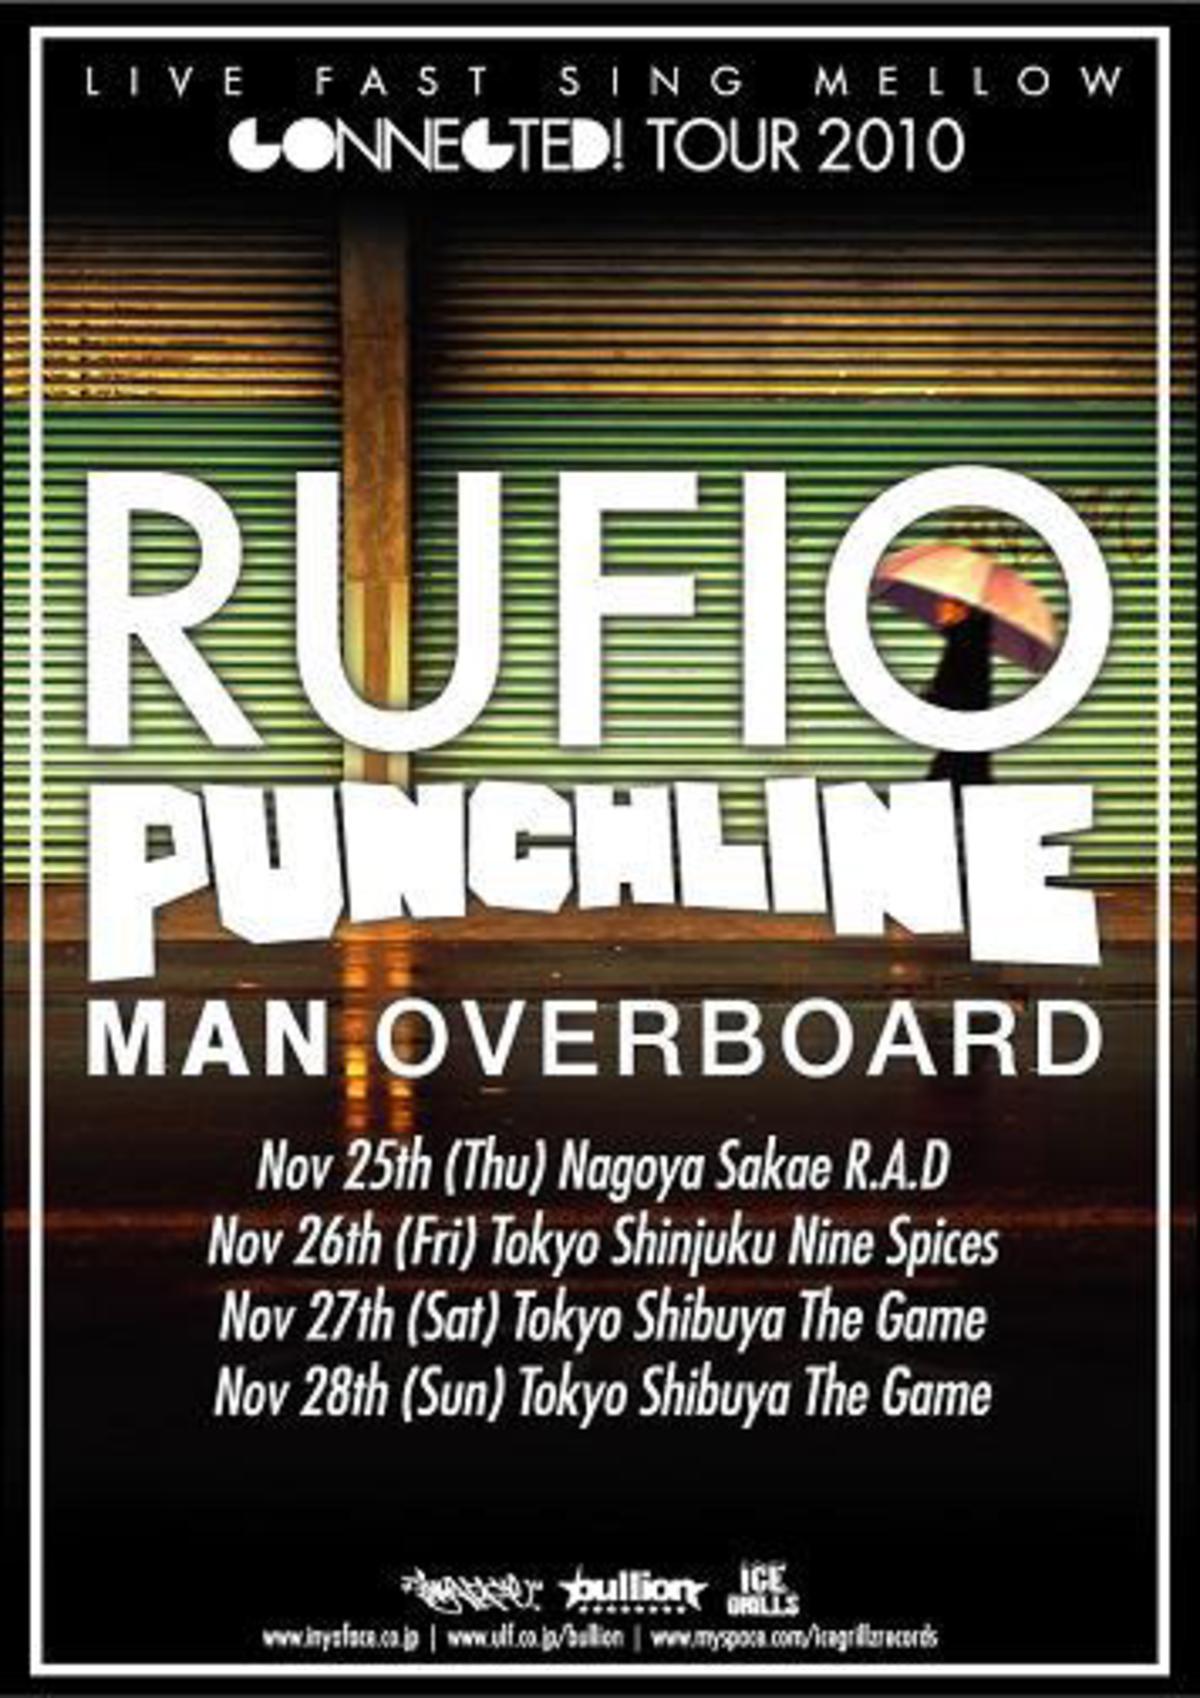 CONNECTED! TOUR 2010 開催決定！RUFIO、PUNCHLINE、MAN OVERBOARDが来 